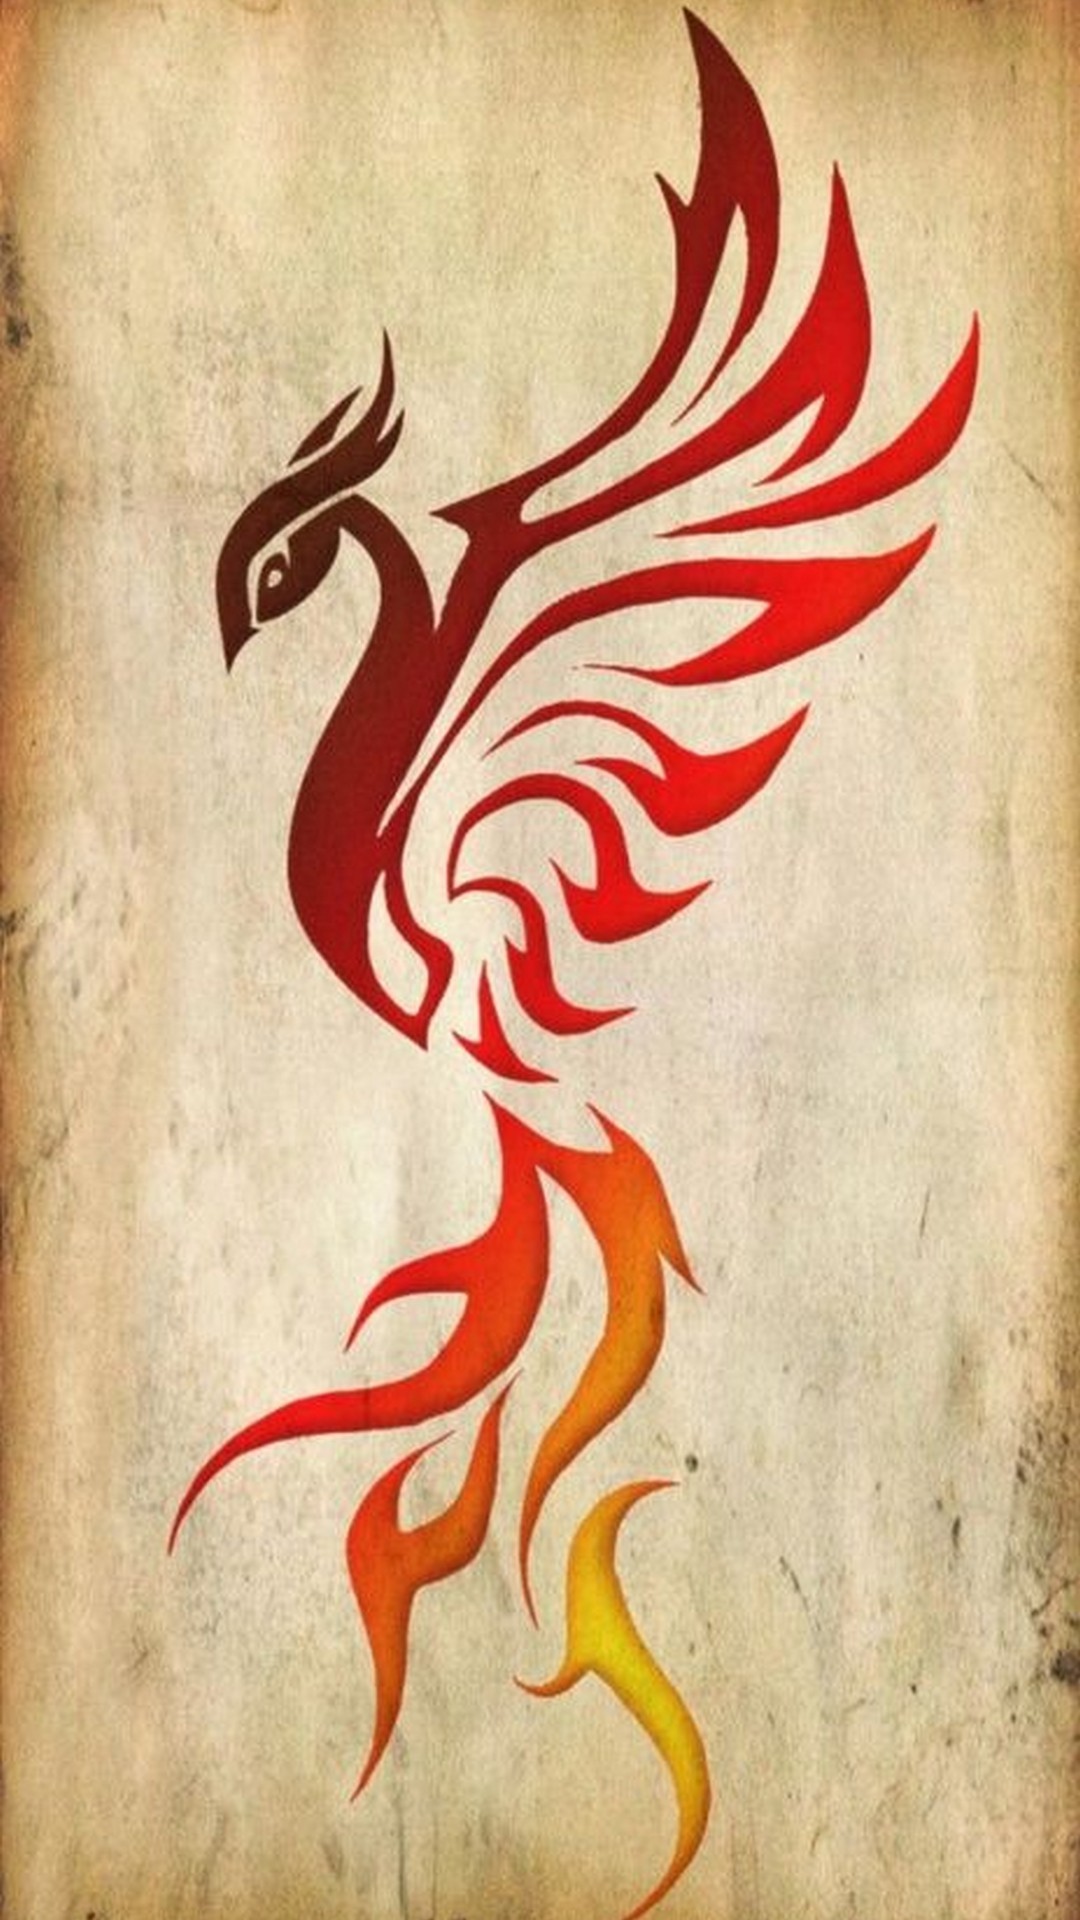 Wallpaper iPhone Phoenix with image resolution 1080x1920 pixel. You can make this wallpaper for your iPhone 5, 6, 7, 8, X backgrounds, Mobile Screensaver, or iPad Lock Screen